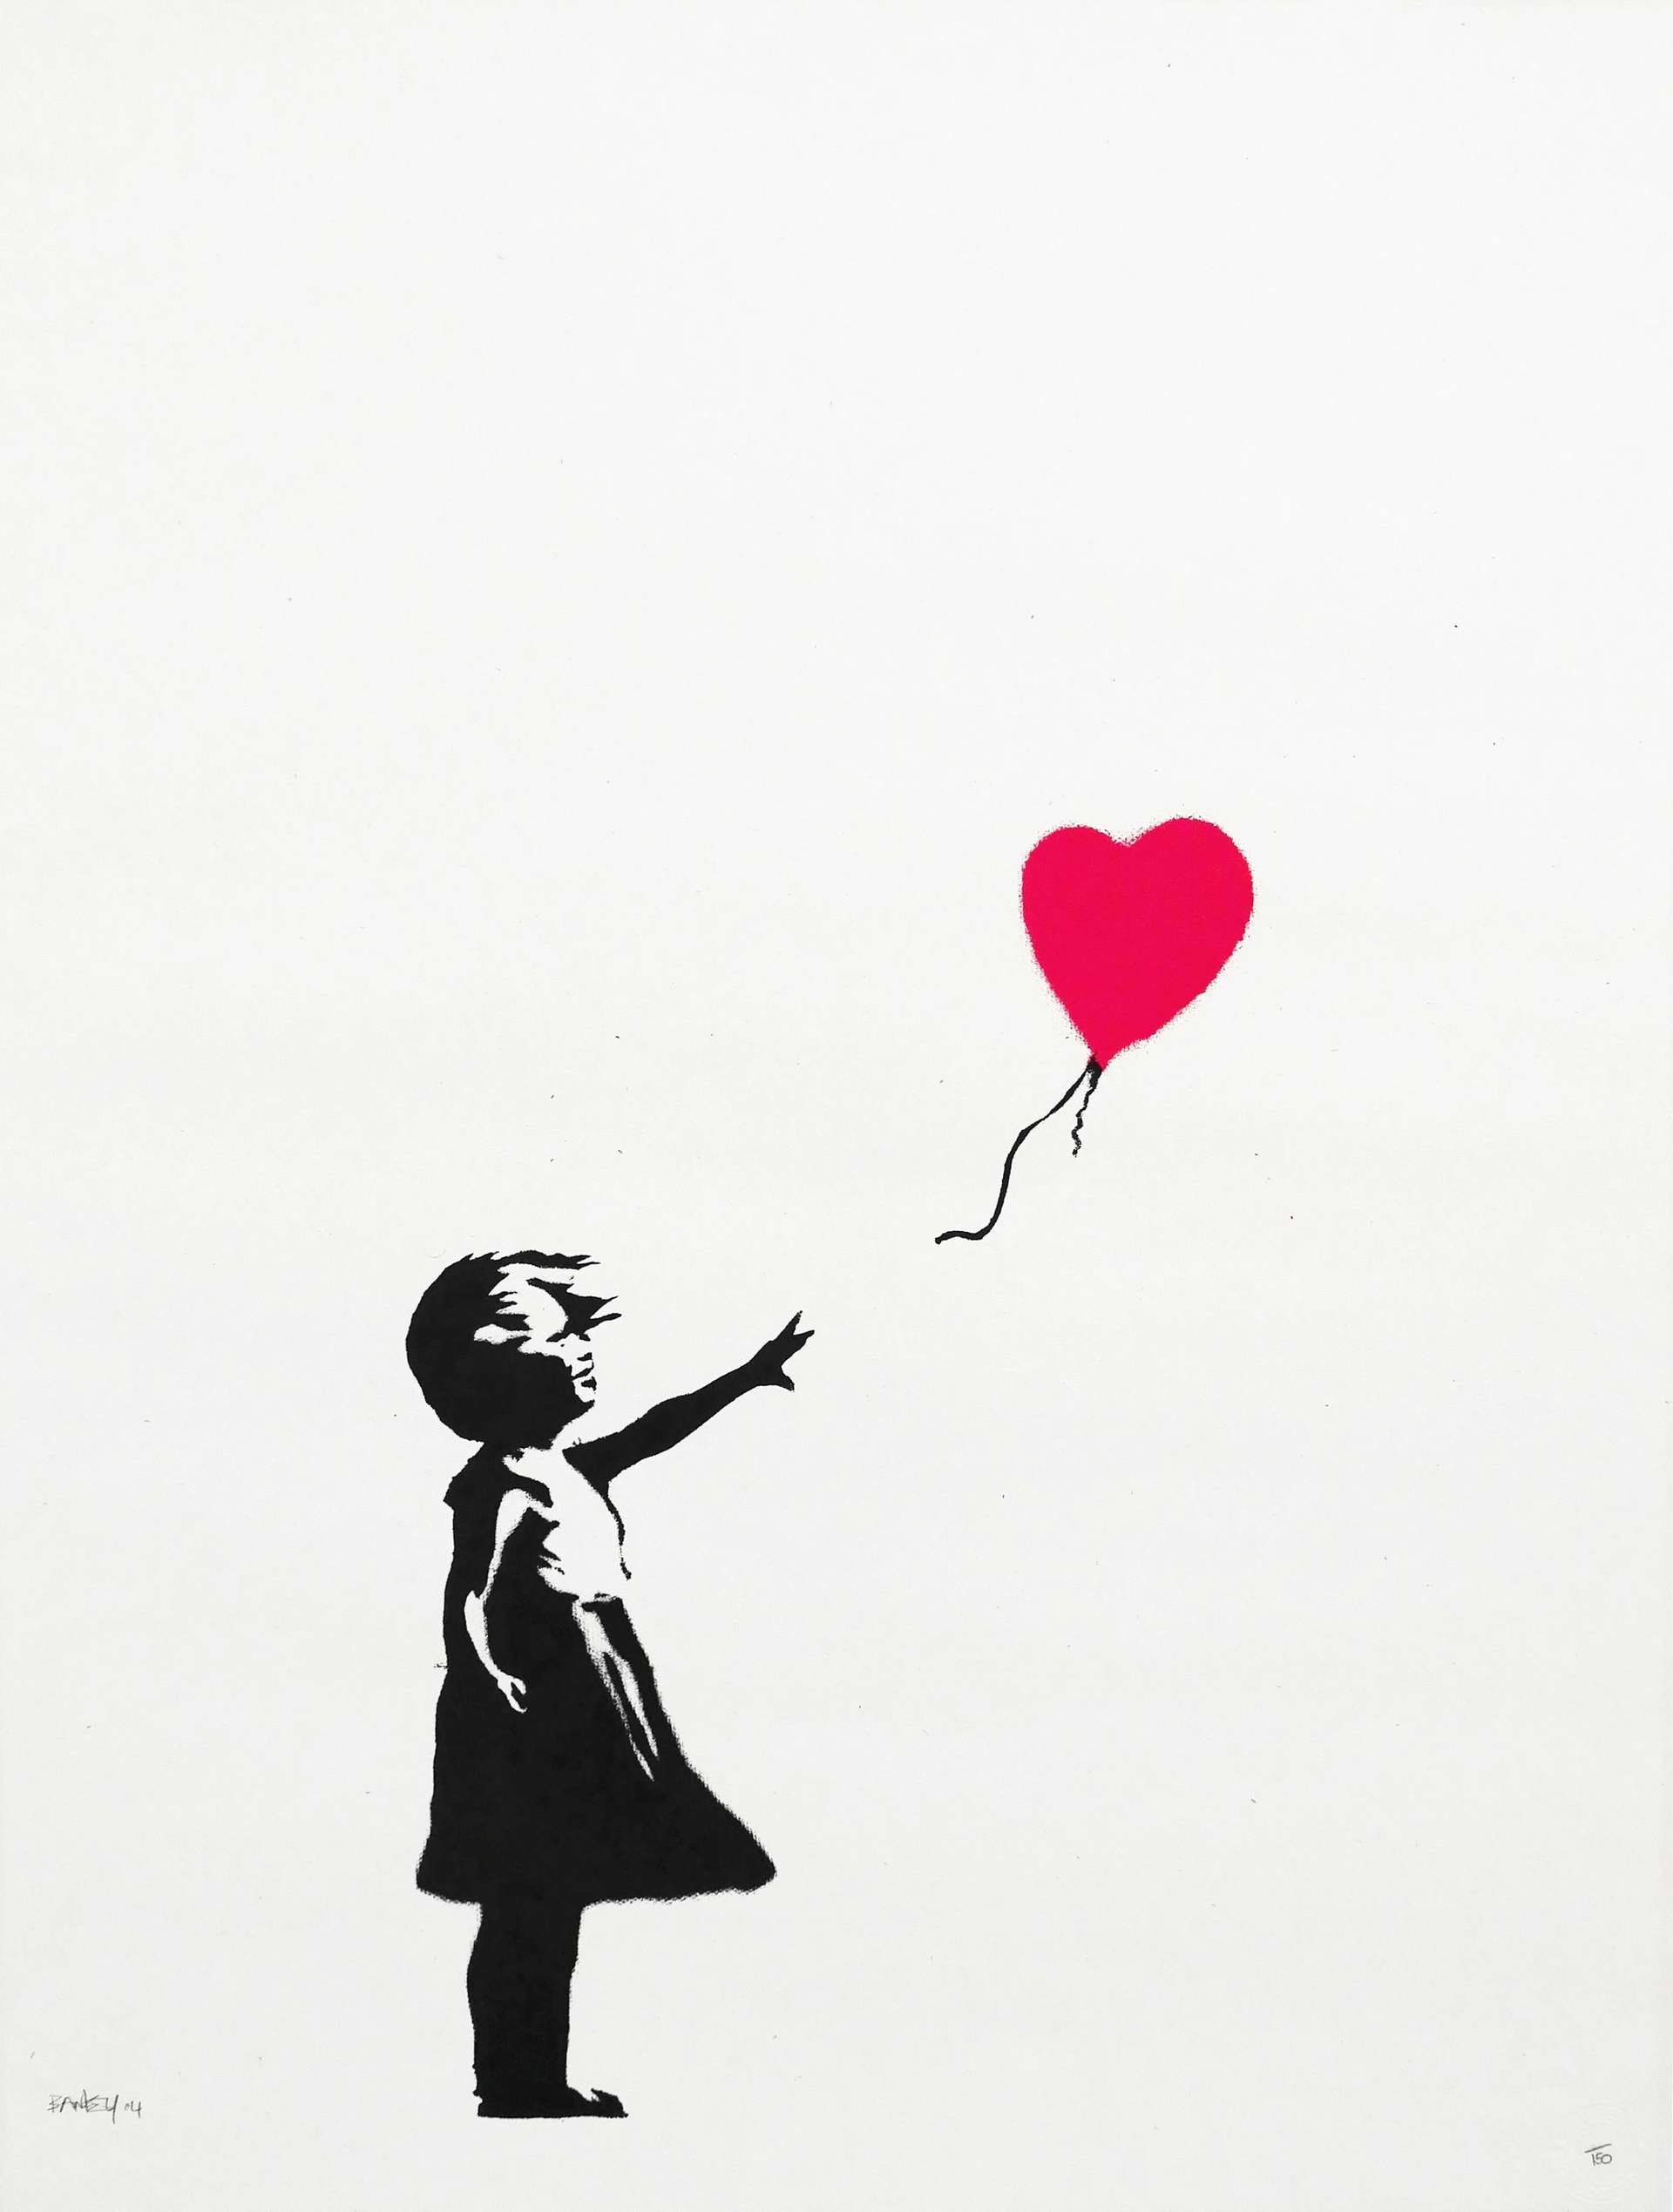 A screenprint by Banksy depicting a young girl in black ink reaching for a red heart-shaped balloon